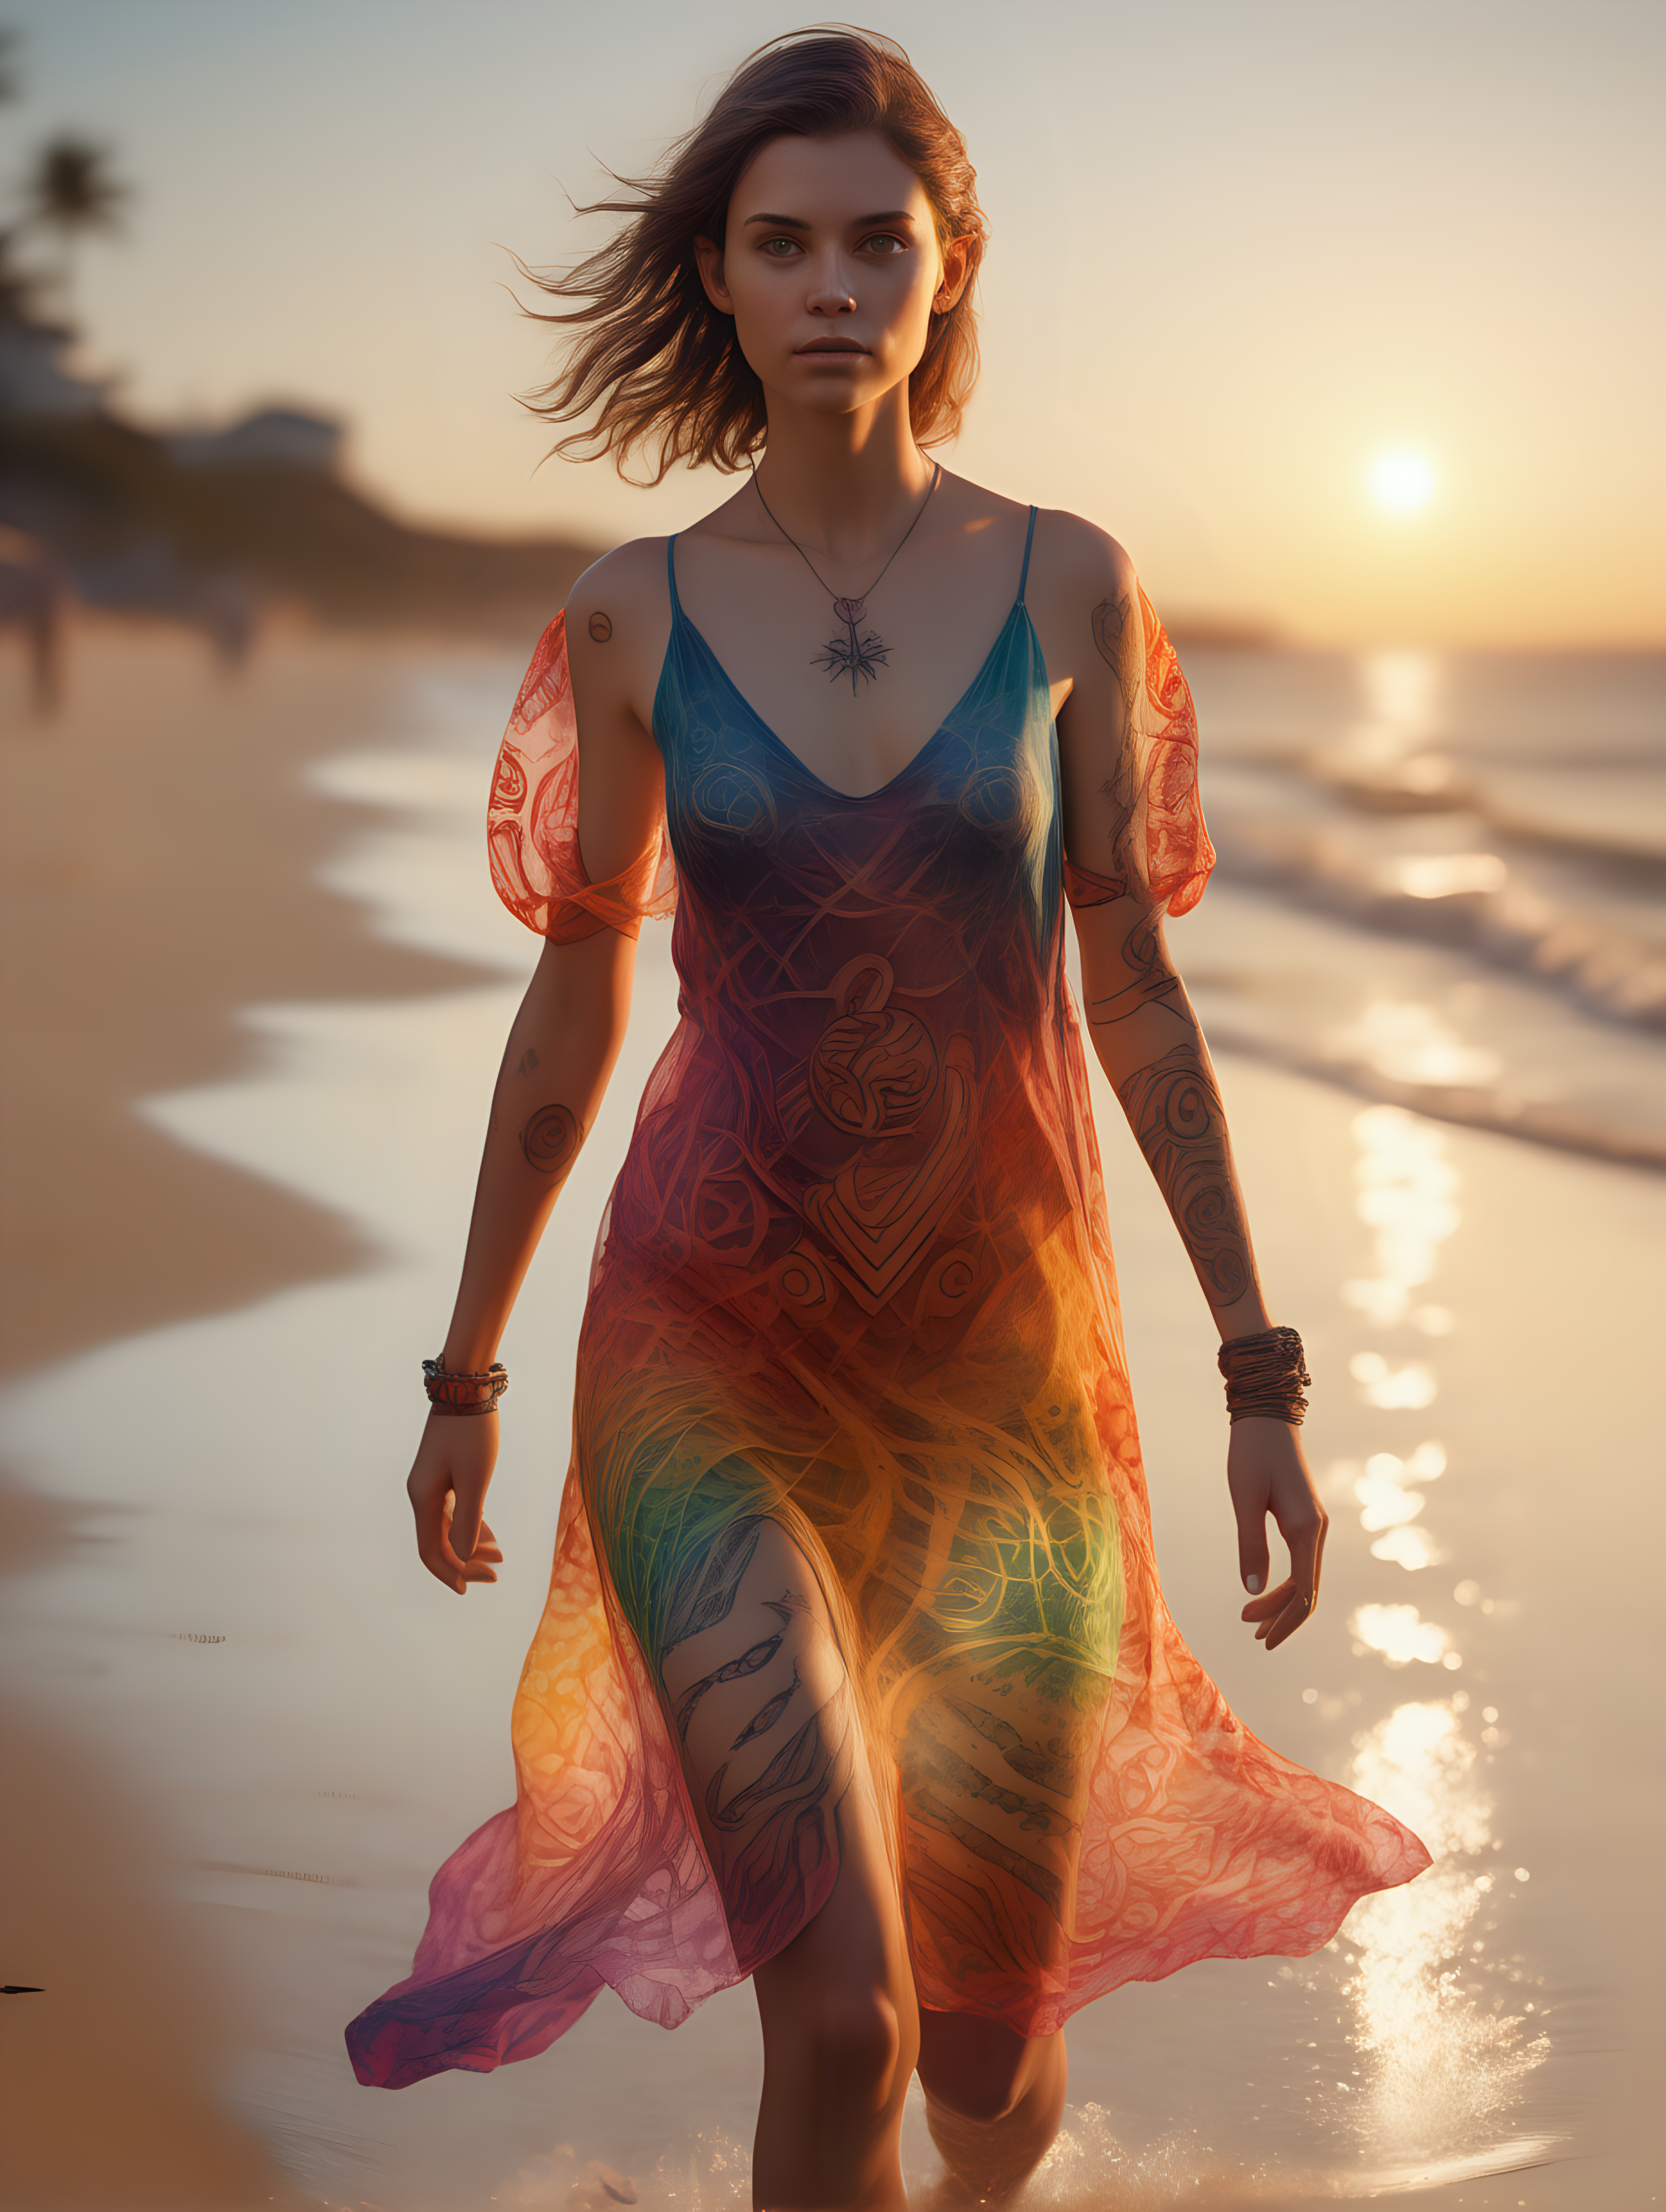 ultra-realistic high resolution and highly detailed photo of a female human, she has draconic symbols carved into her arms and body, wearing a colourful transparent summer dress, walking in the sunset on a beach facing the camera